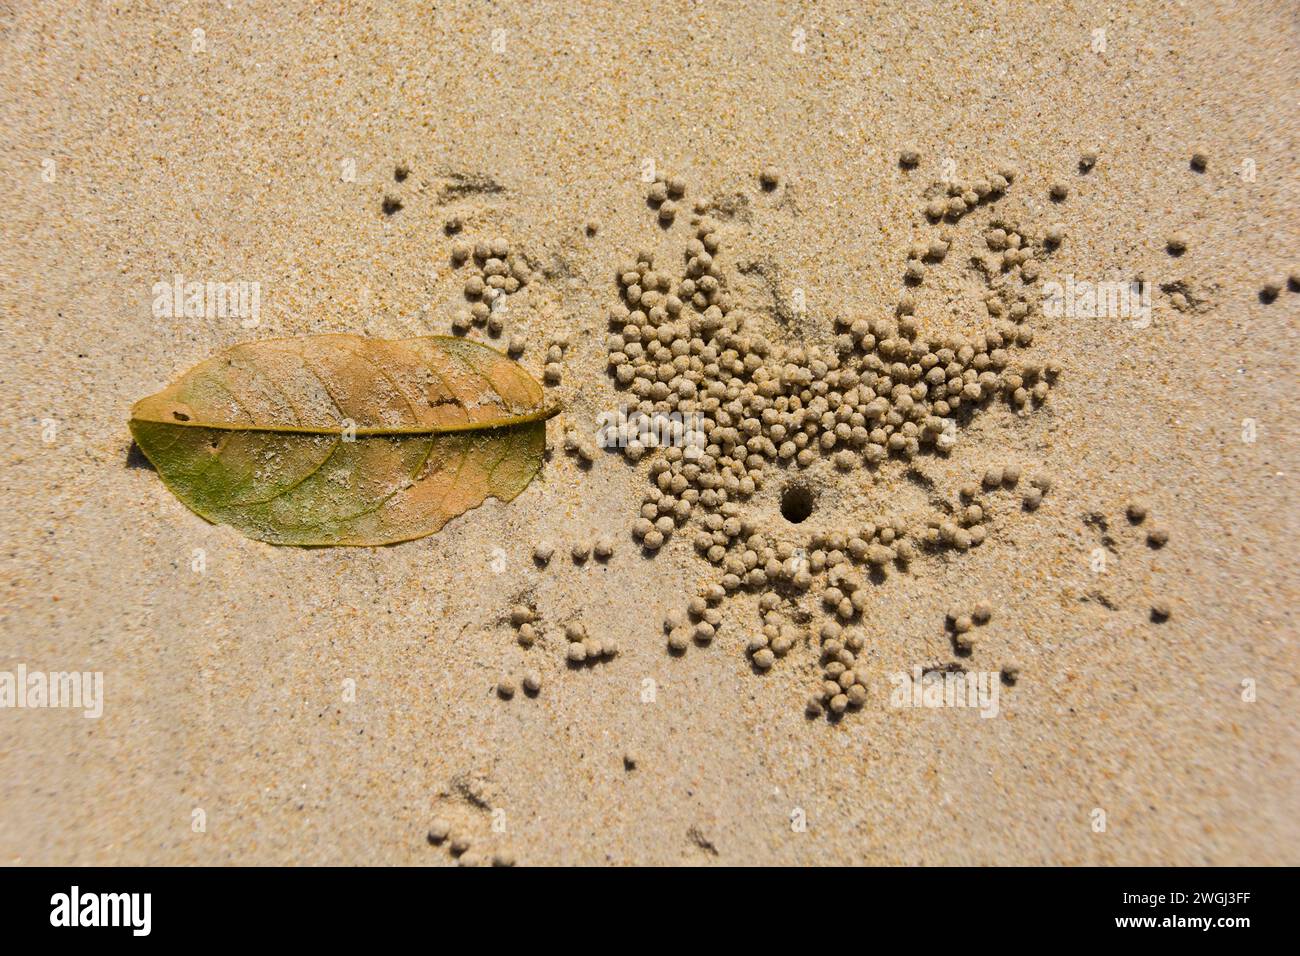 Small black holes scattered across sandy beach with leaf Stock Photo